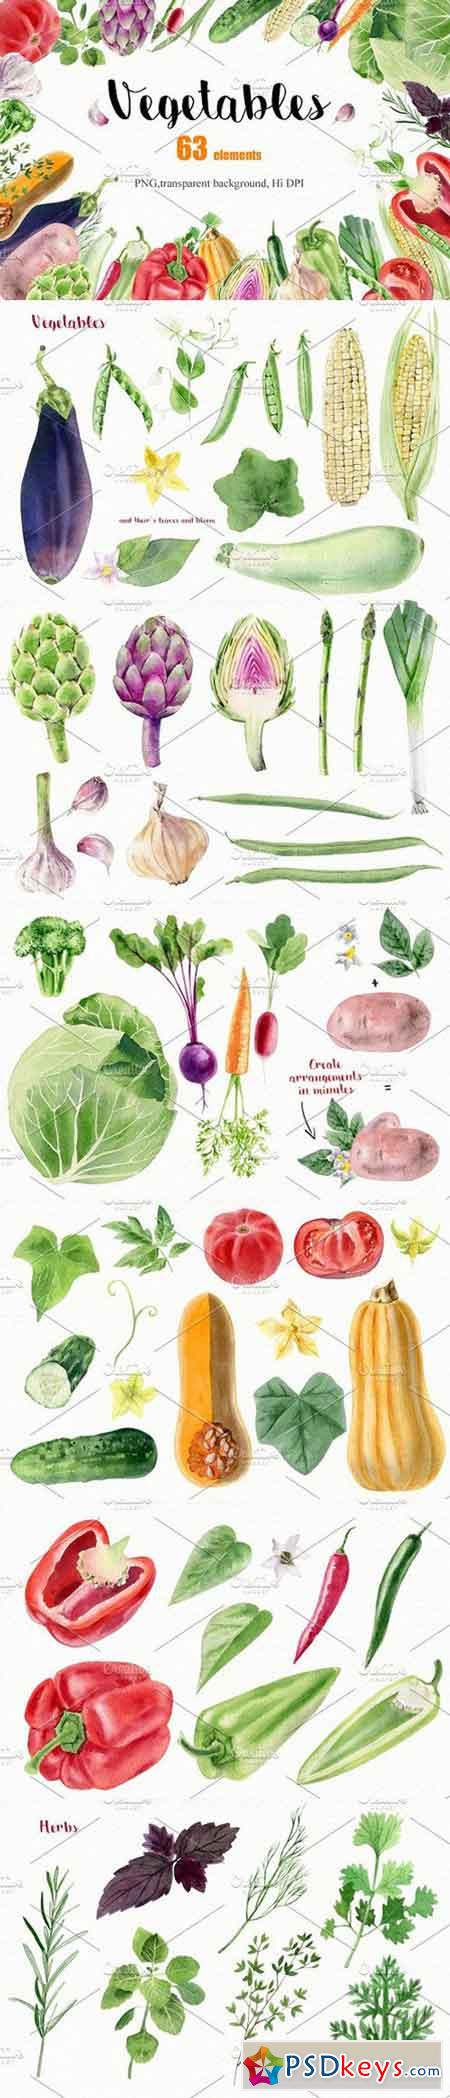 Watercolor vegetables and herbs 1634324